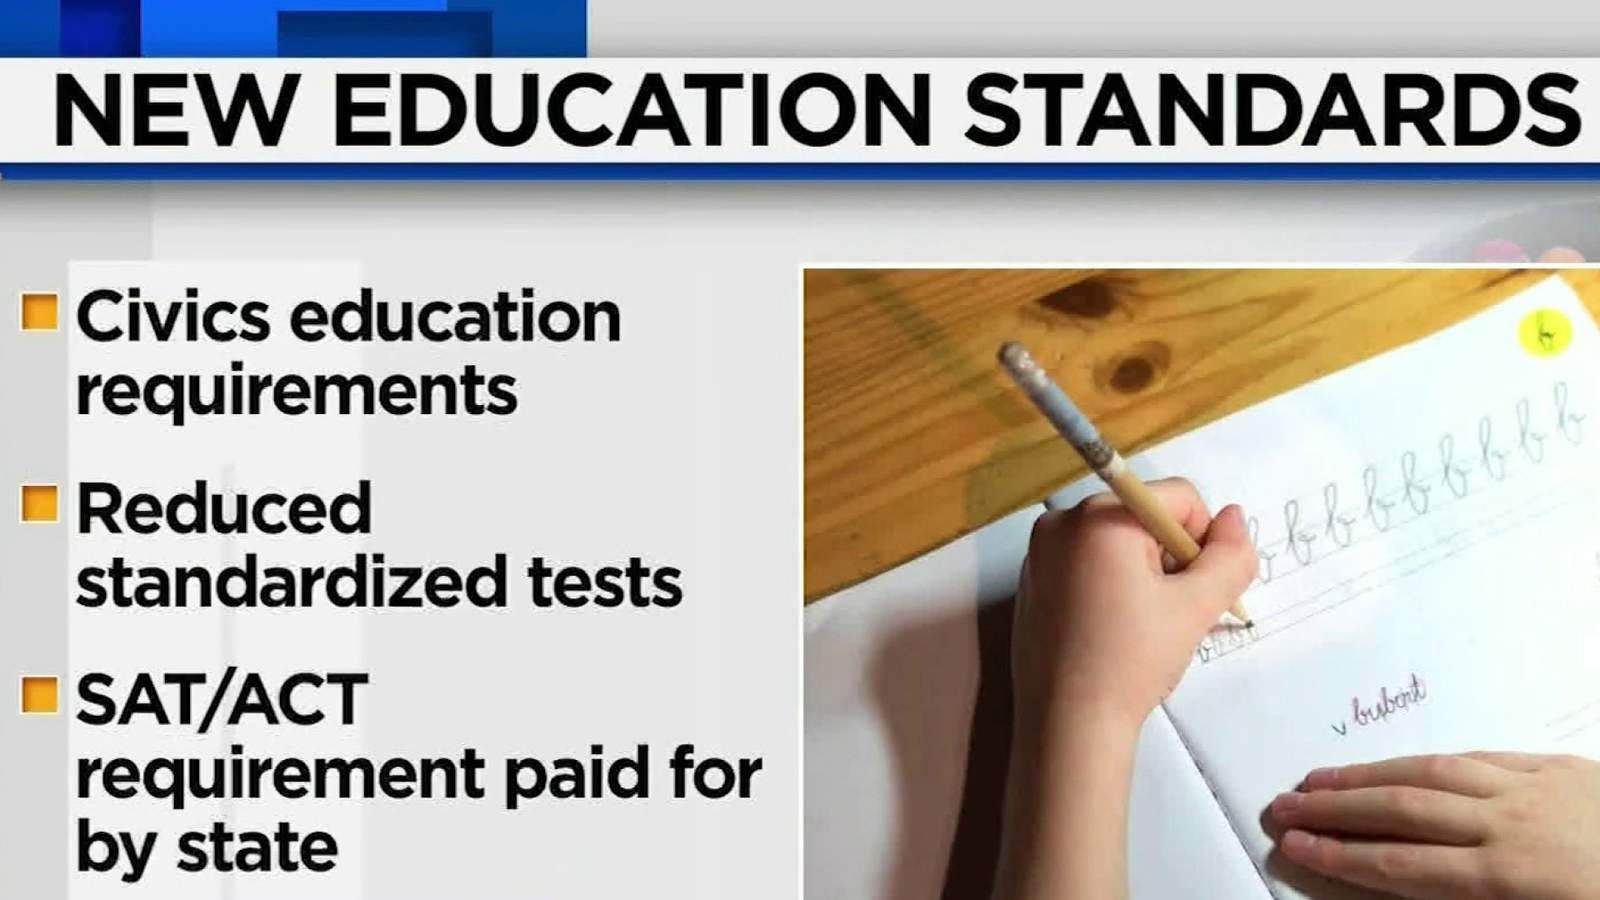 Here’s how your student will be affected by the removal of Common Core in Florida schools